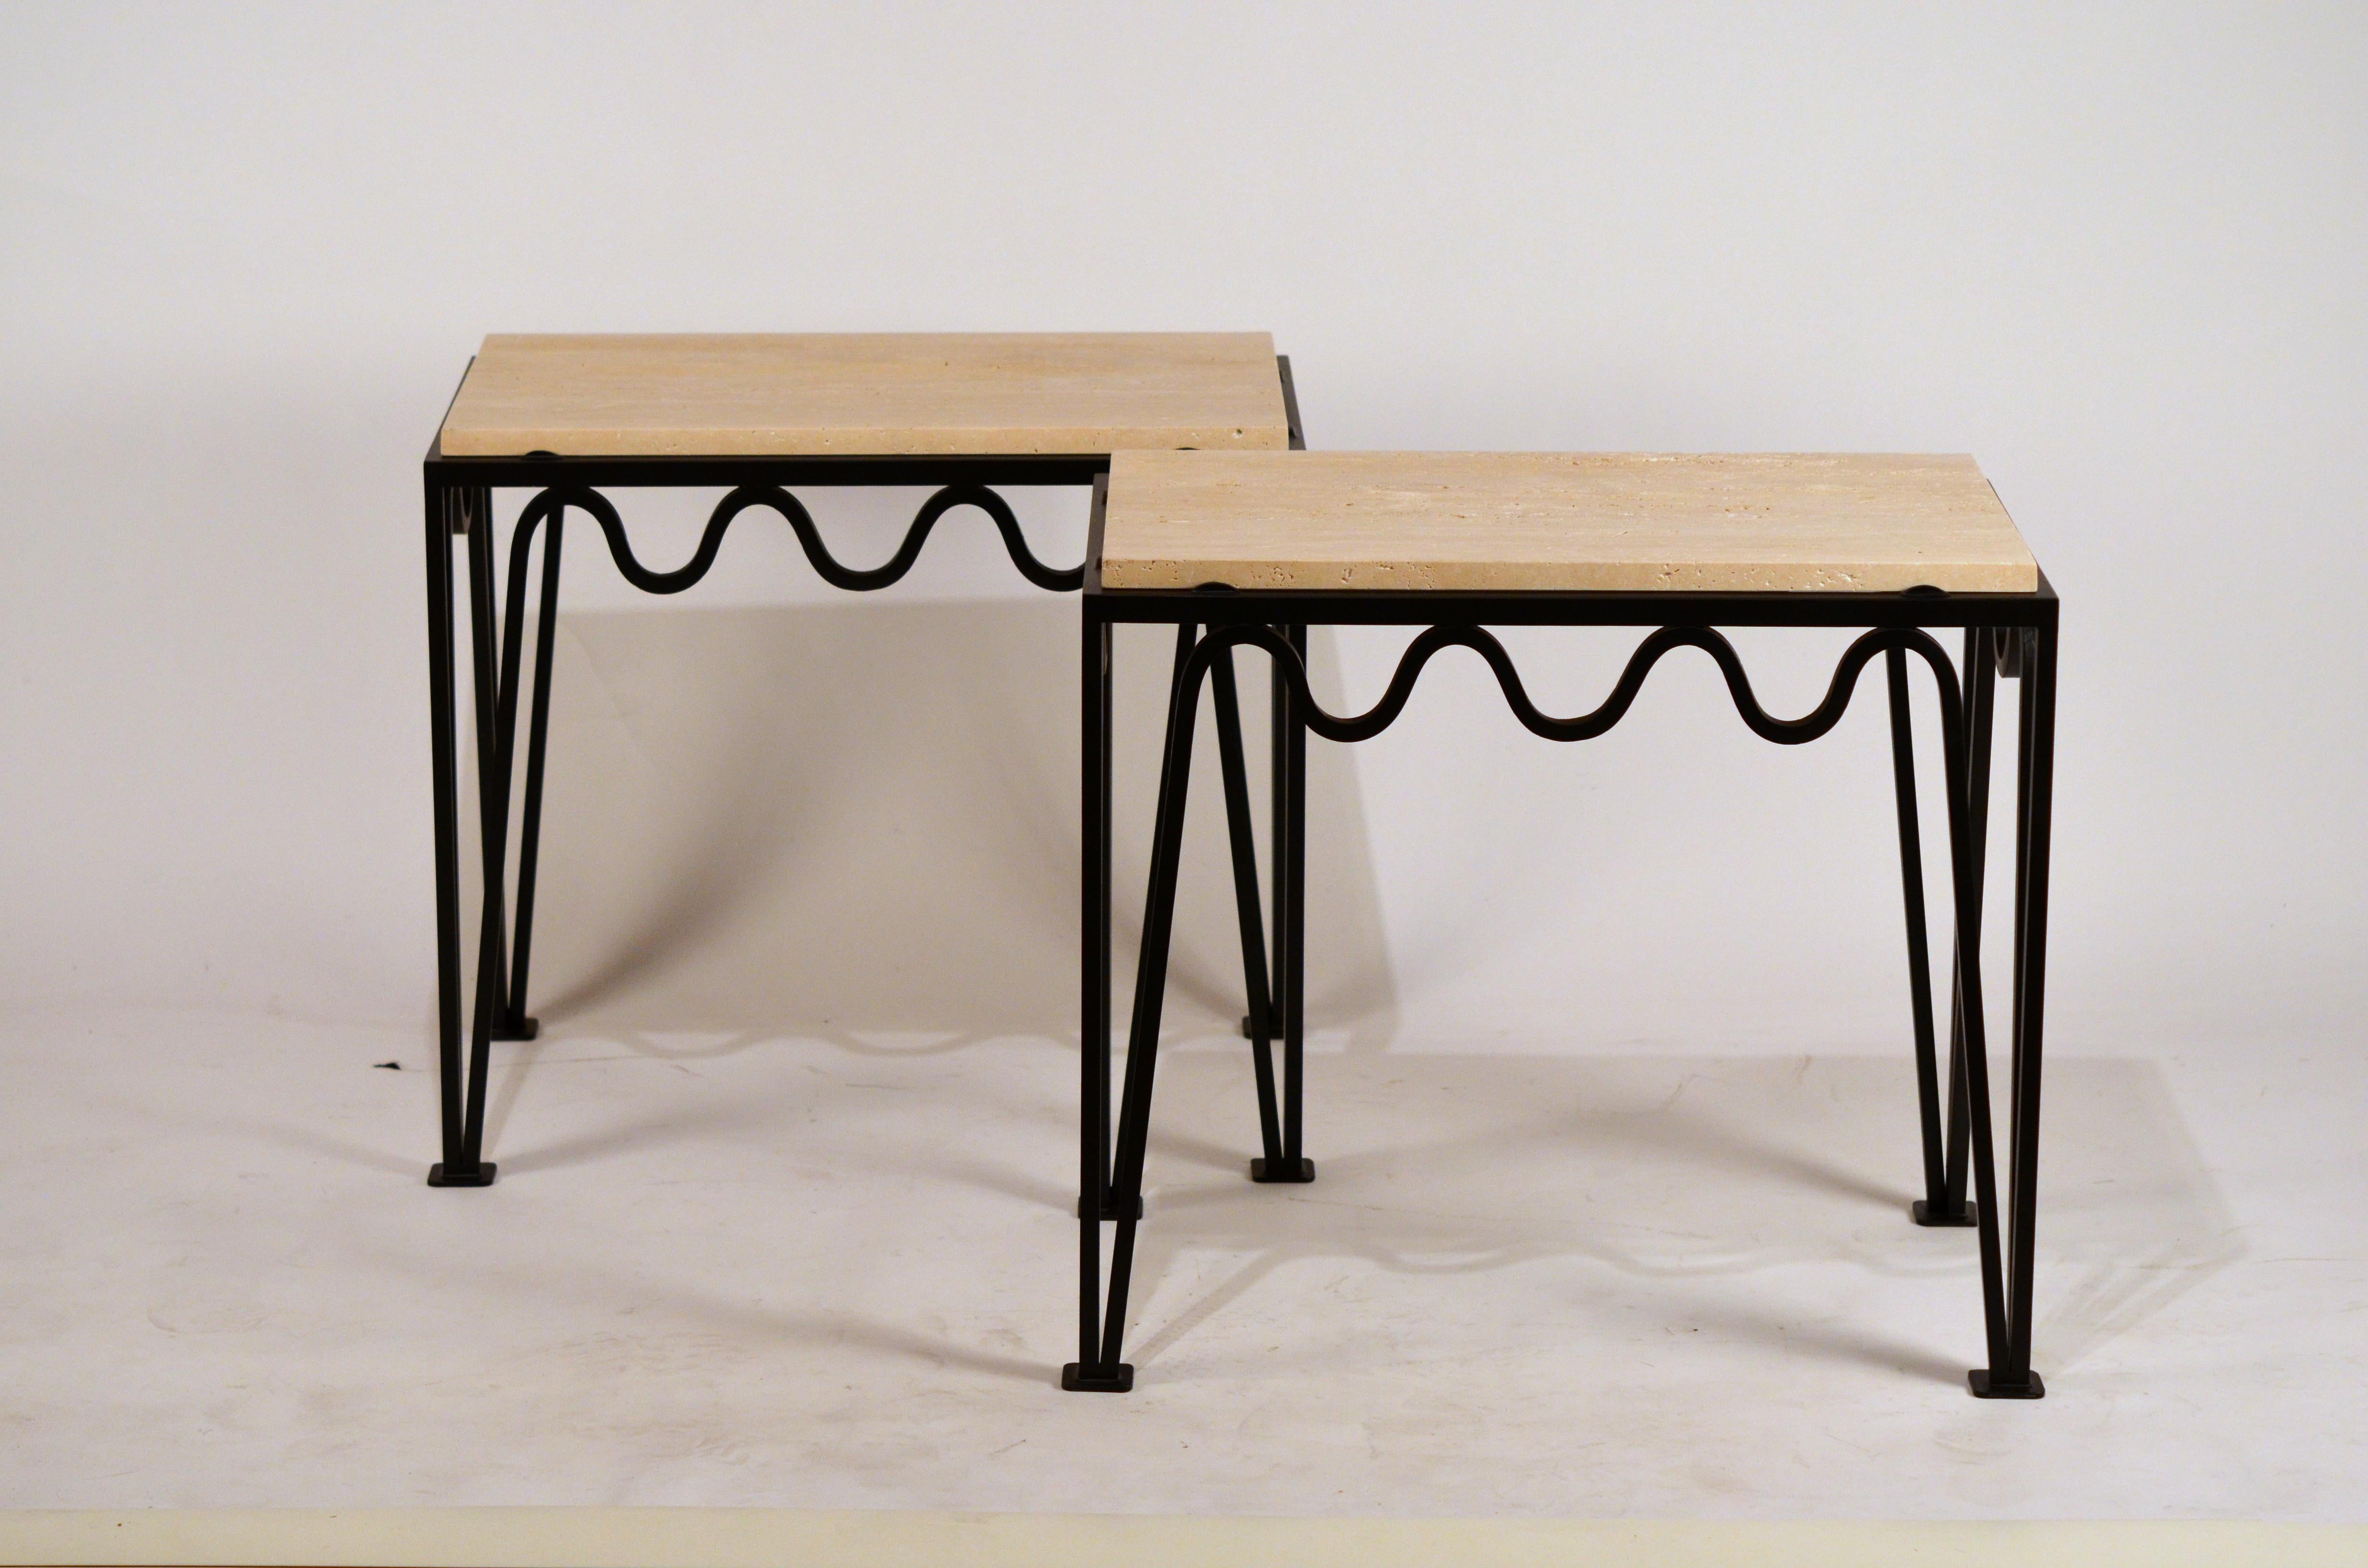 Pair of 'Méandre' black iron and cream travertine side tables by Design Frères.

Chic and understated.

Please note that lead times are estimates, not actual lead times on orders. Do not order anything hand made to order if you have a fixed install